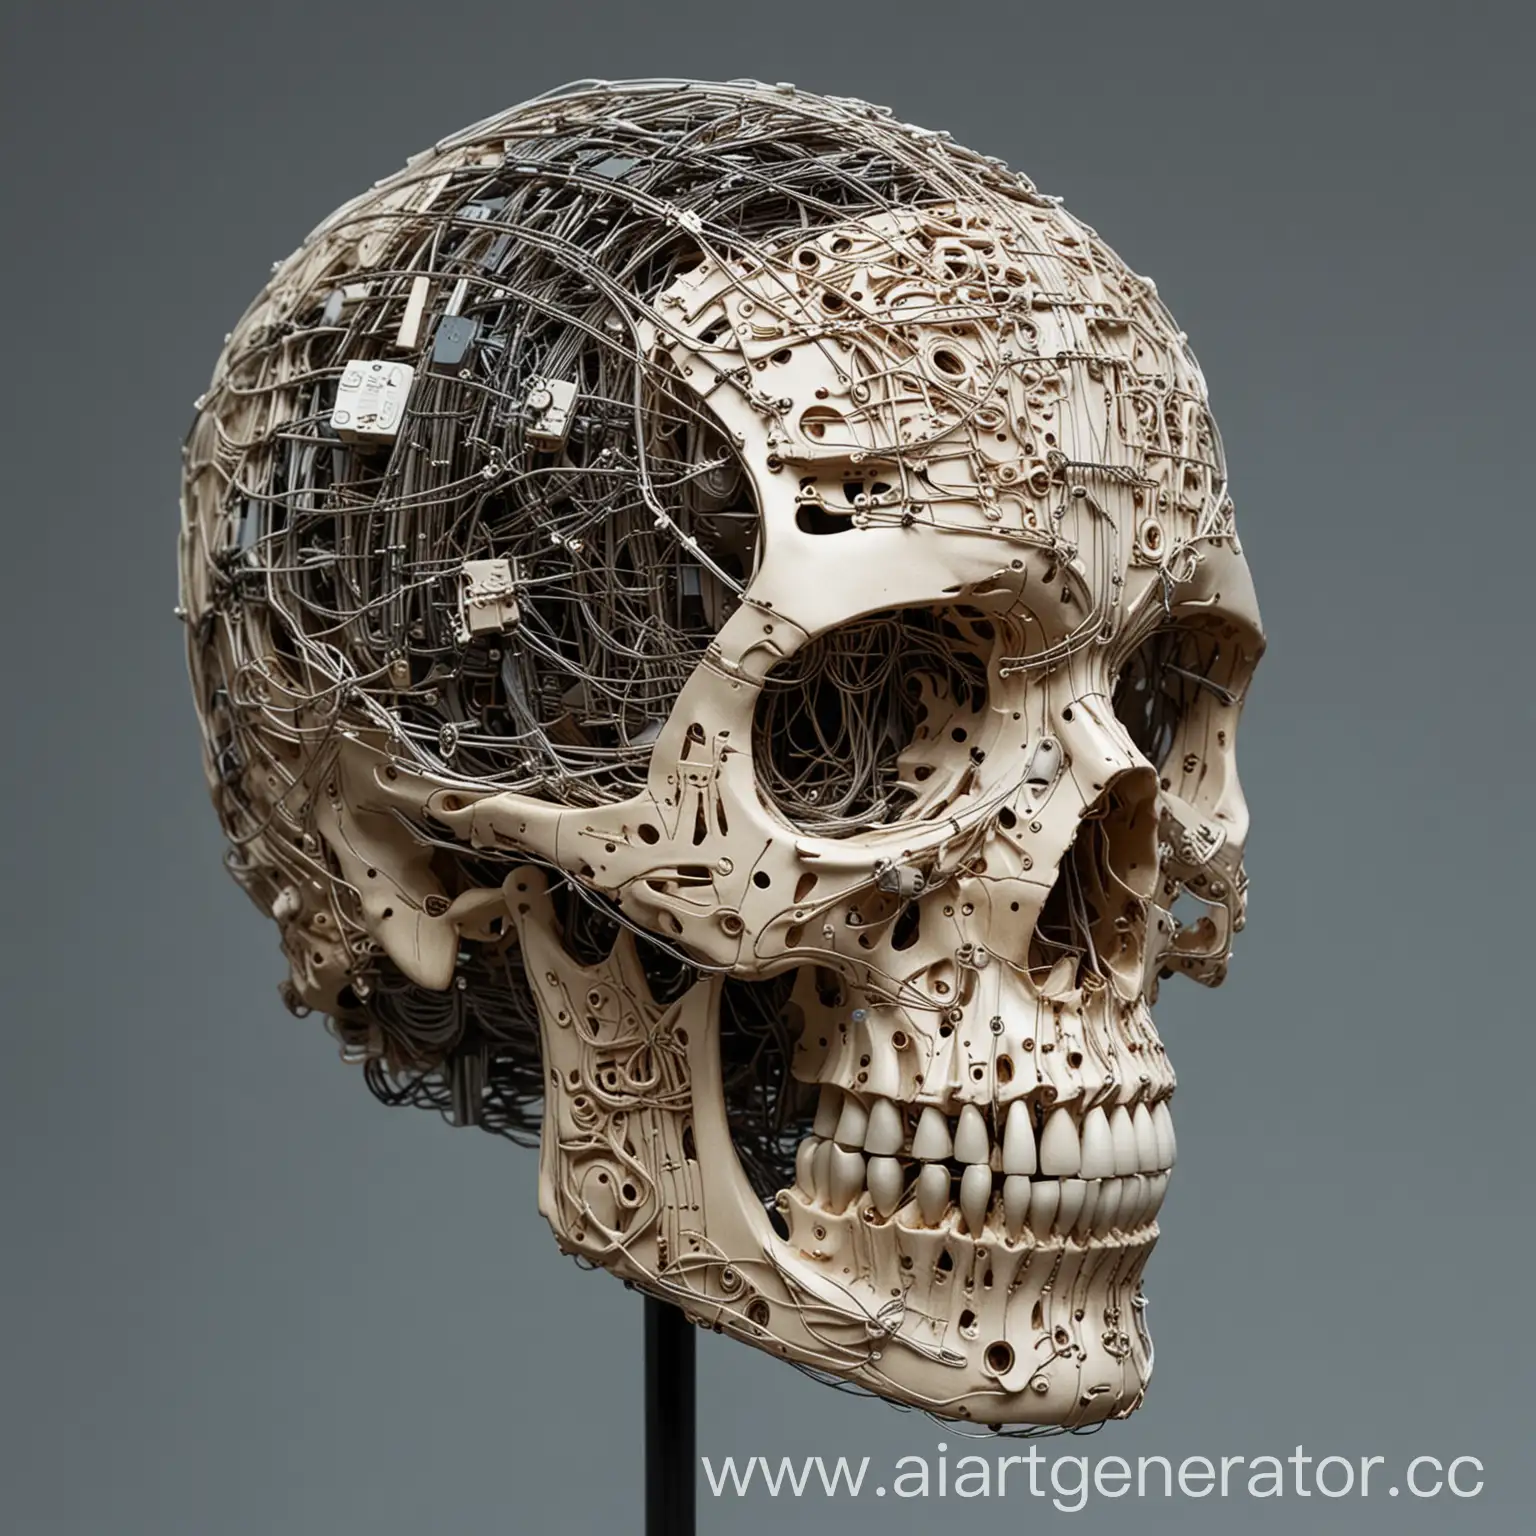 AI innovative mind solution da vinci  skull model made of wires and chip 
